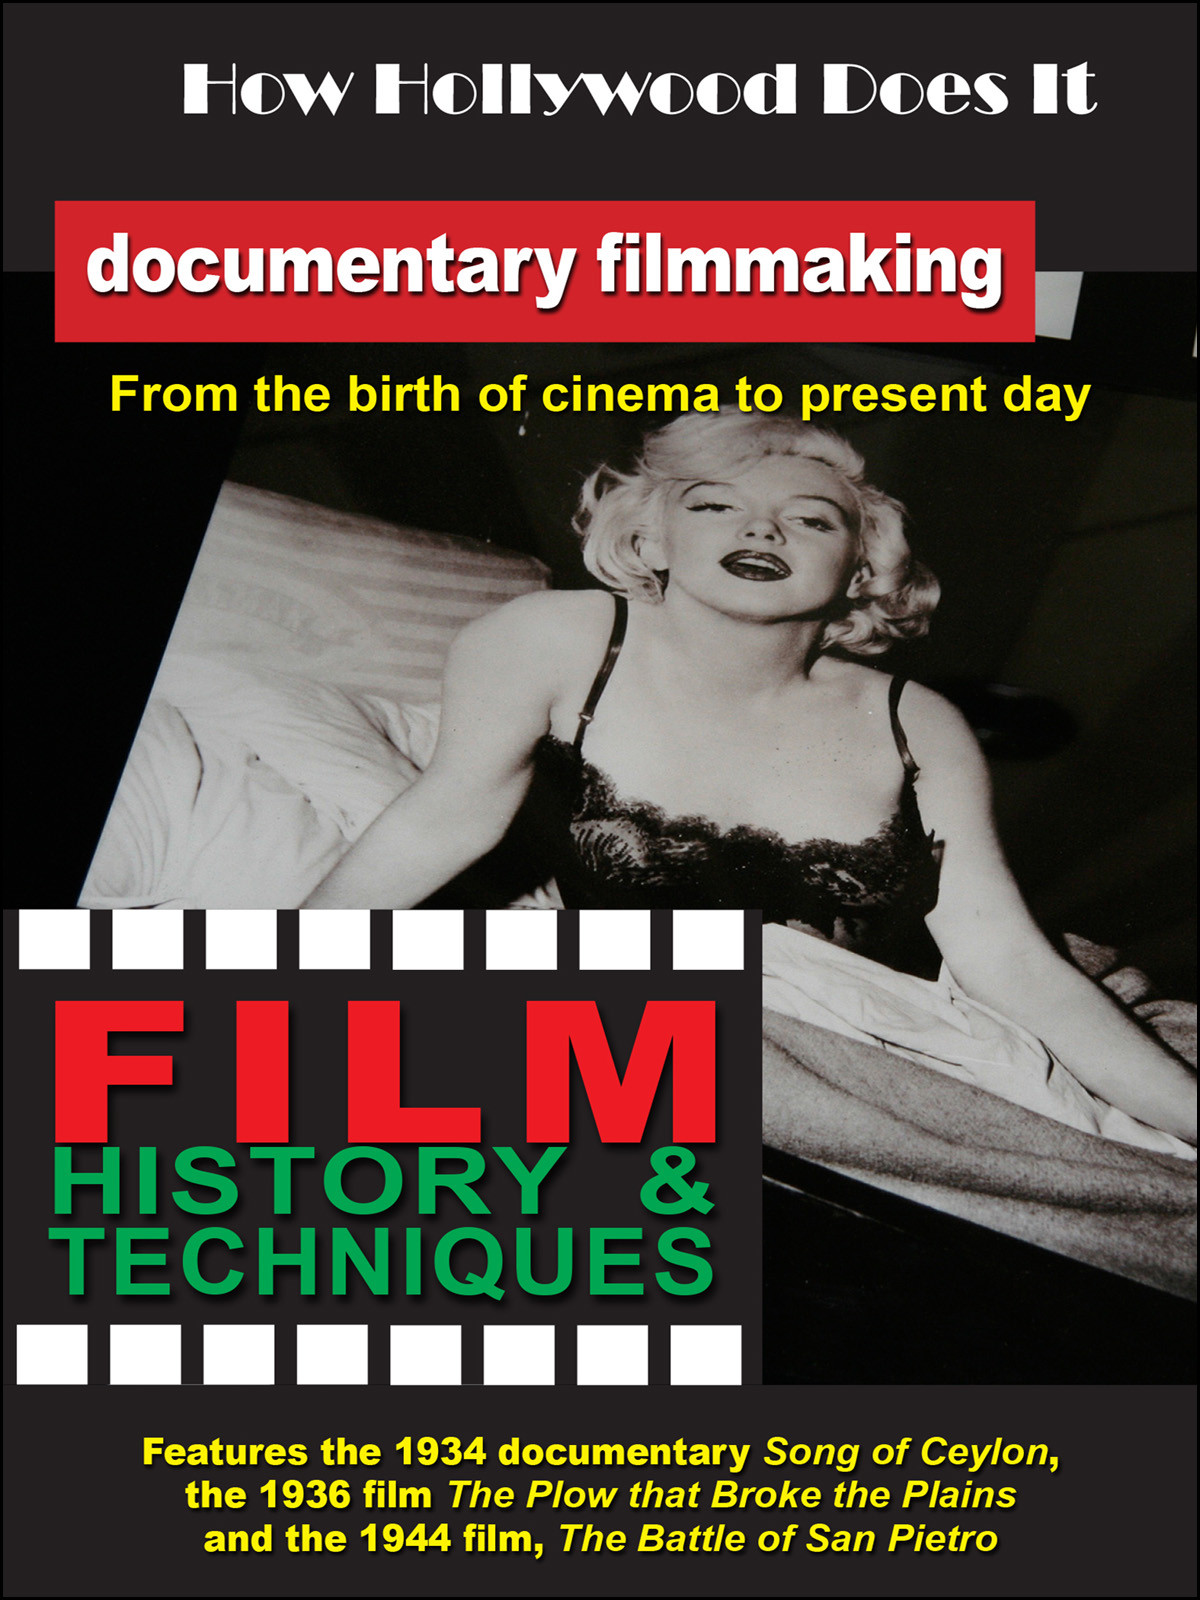 F2715 - How Hollywood Does It - Film History & Techniques of Documentary Filmmaking